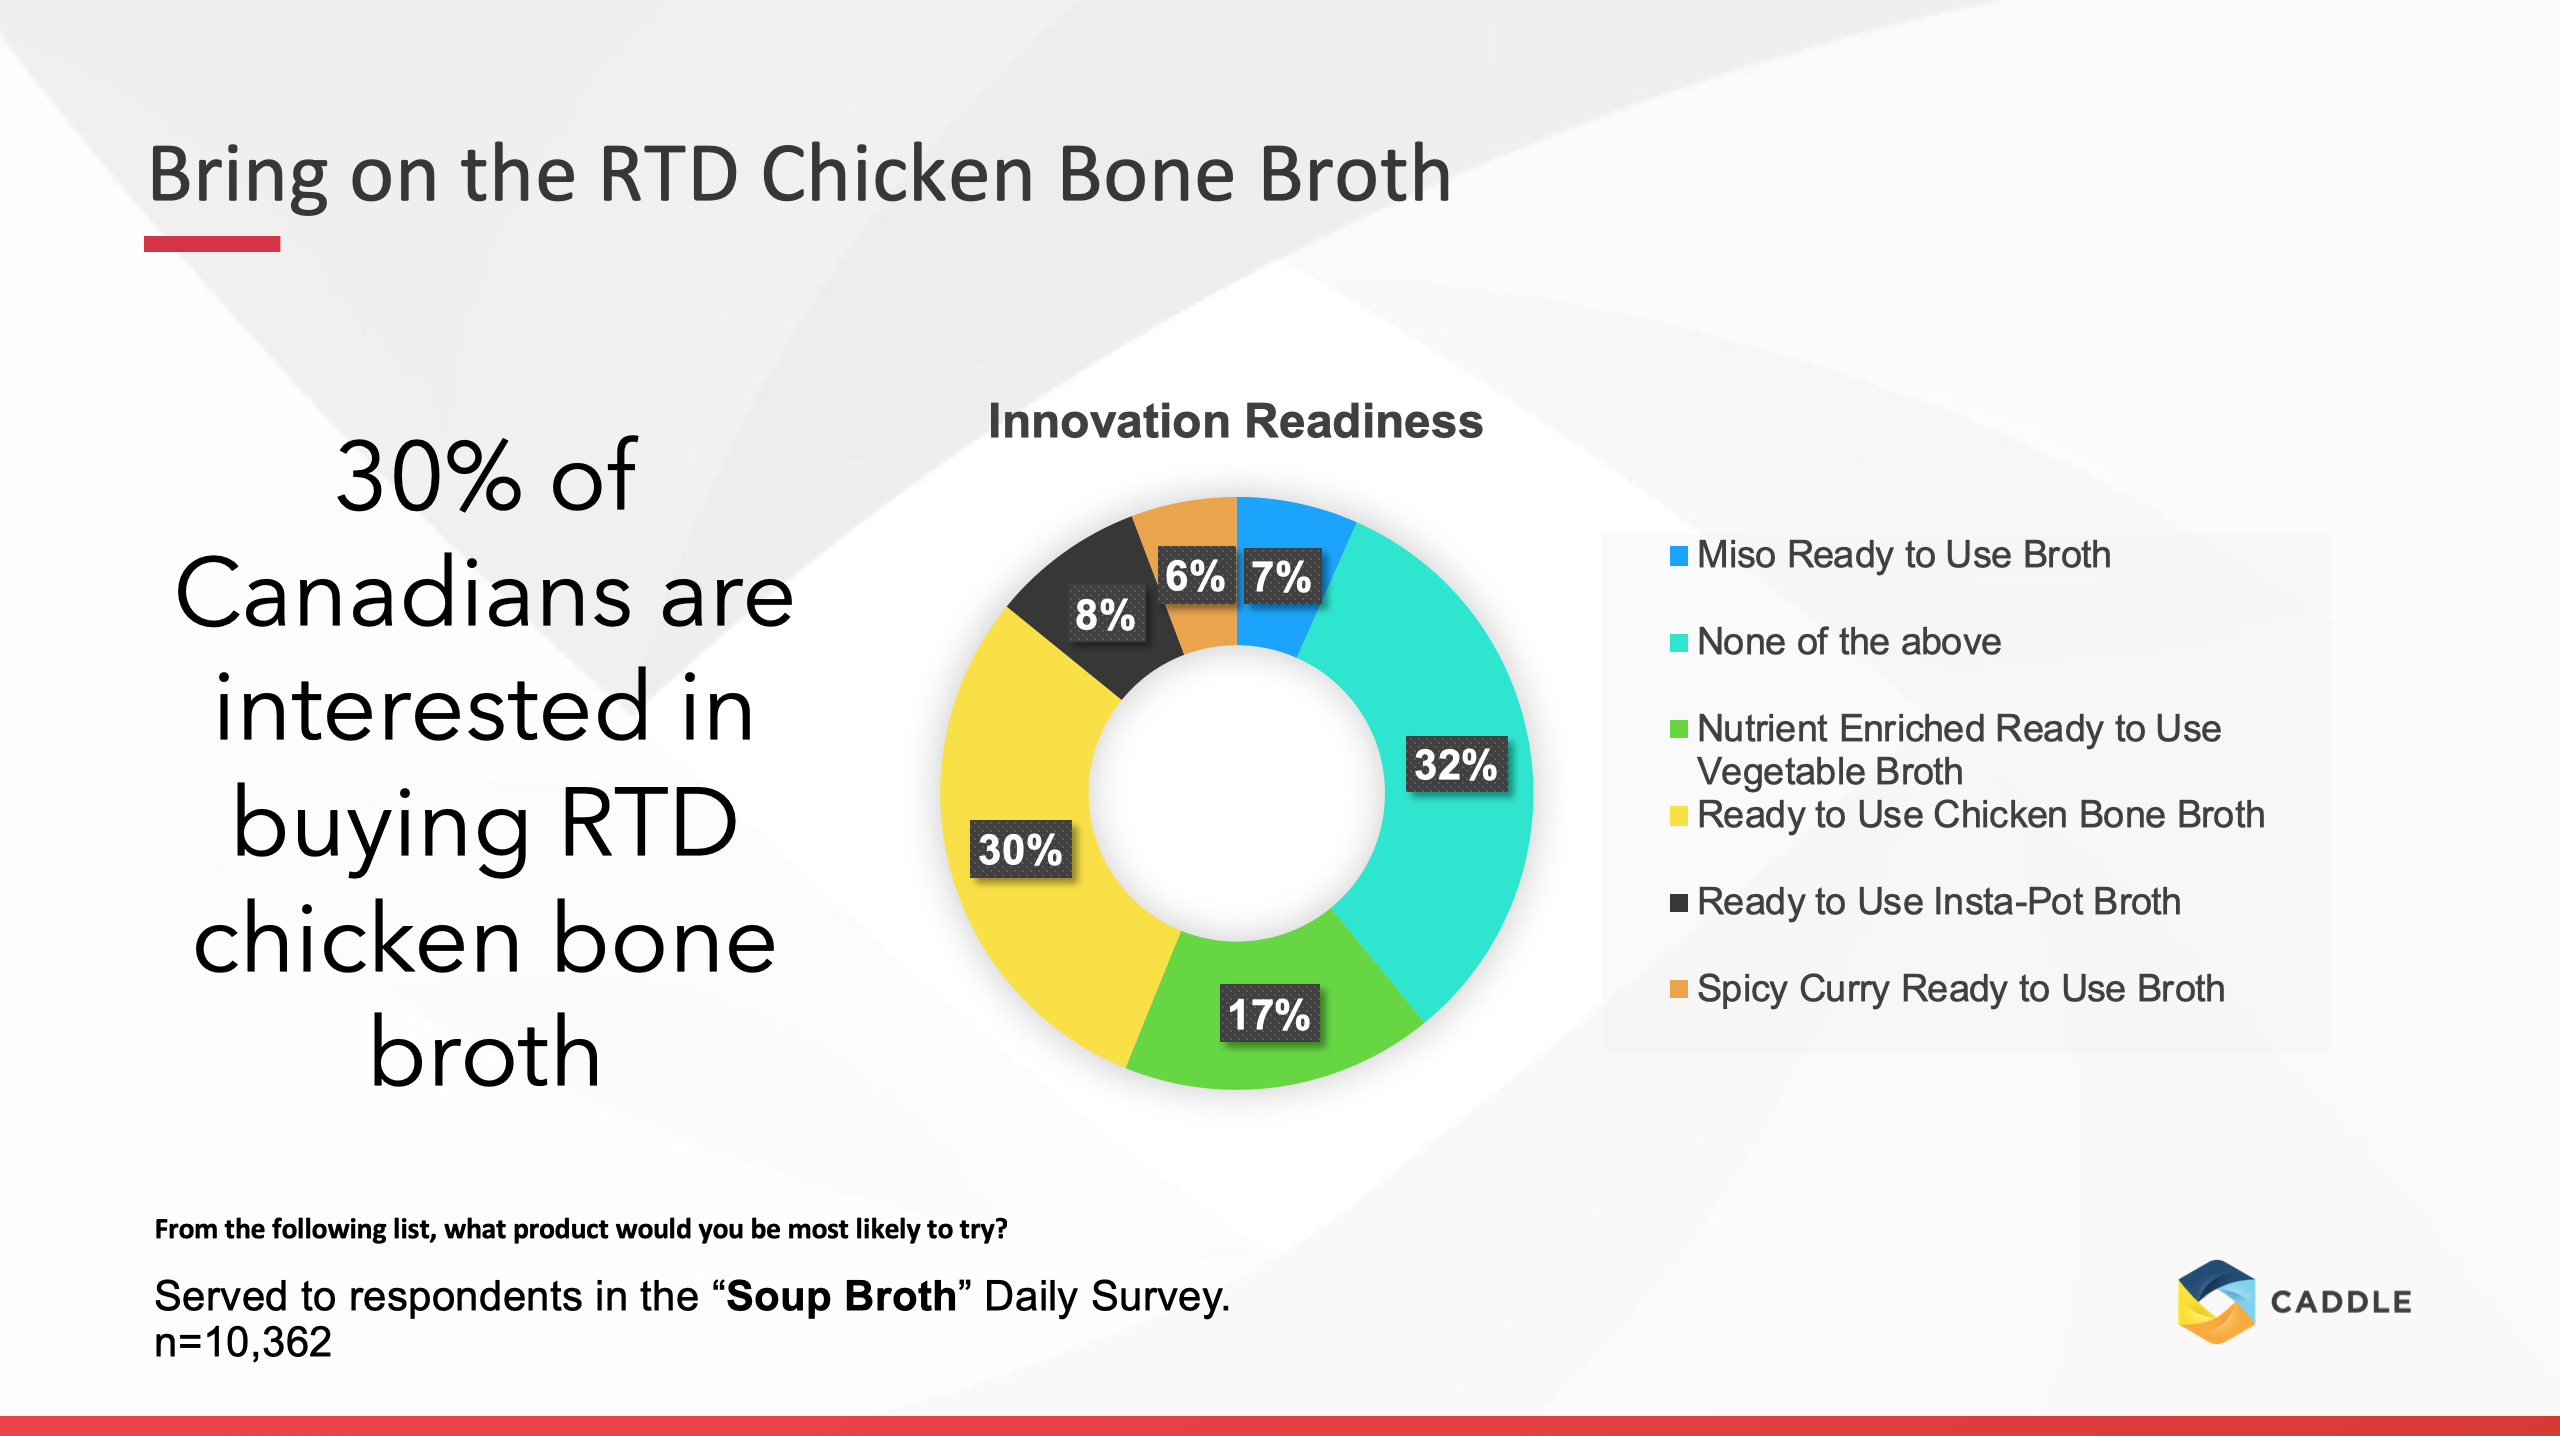 Is bone broth the answer to the soup broth industry?